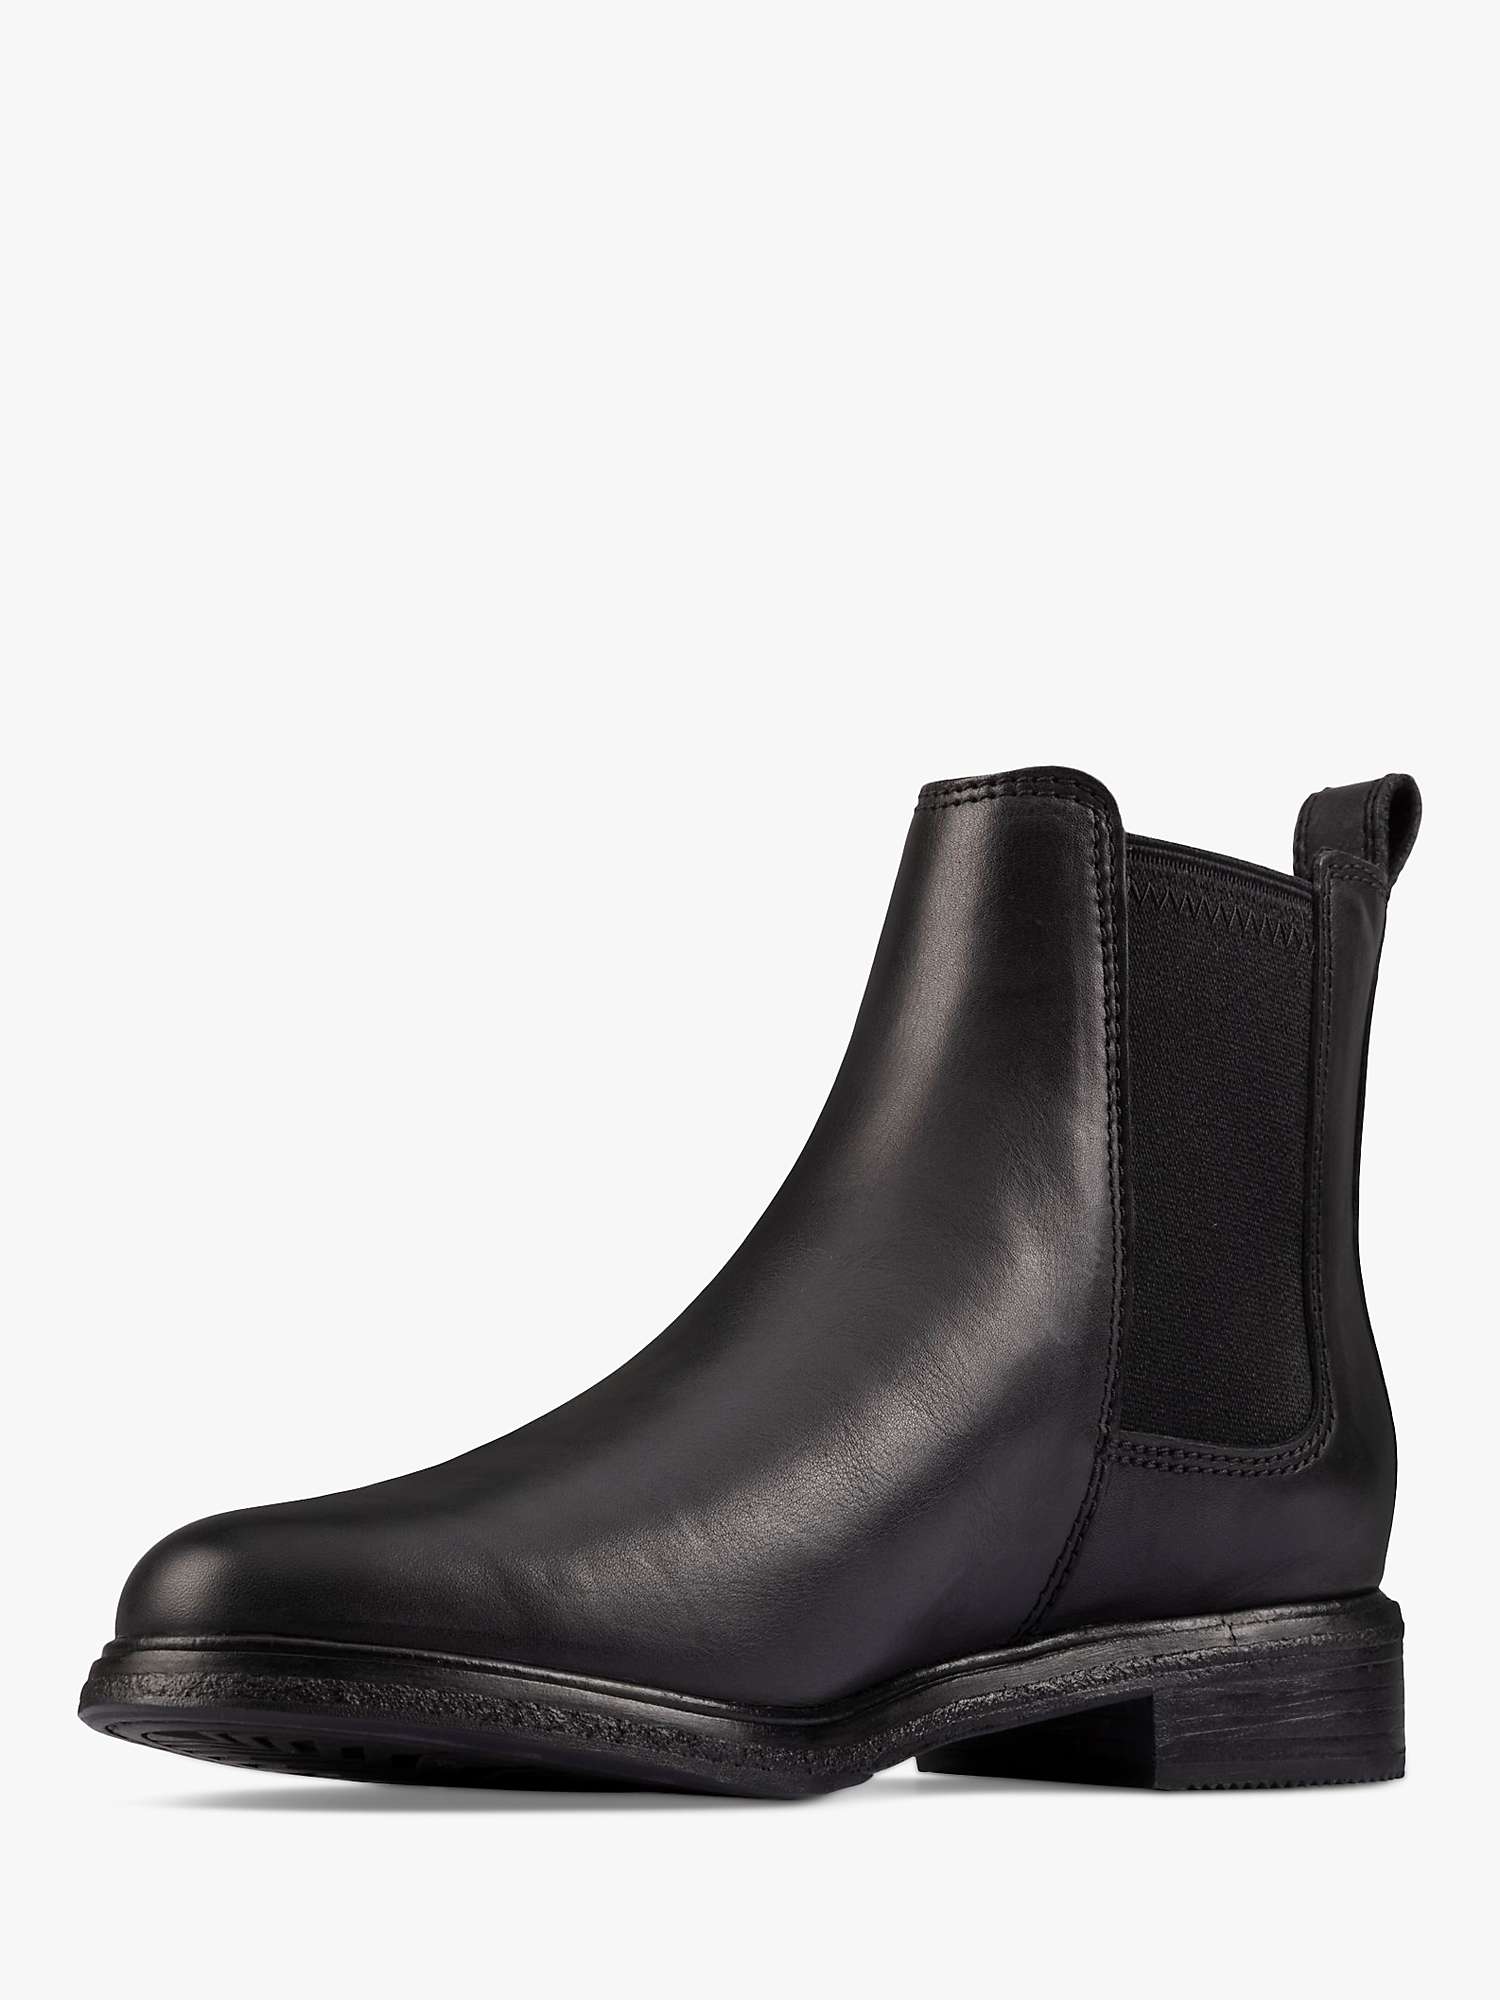 Clarks Clarkdale Arlo Wide Fit Leather Chelsea Boots, Black at John ...